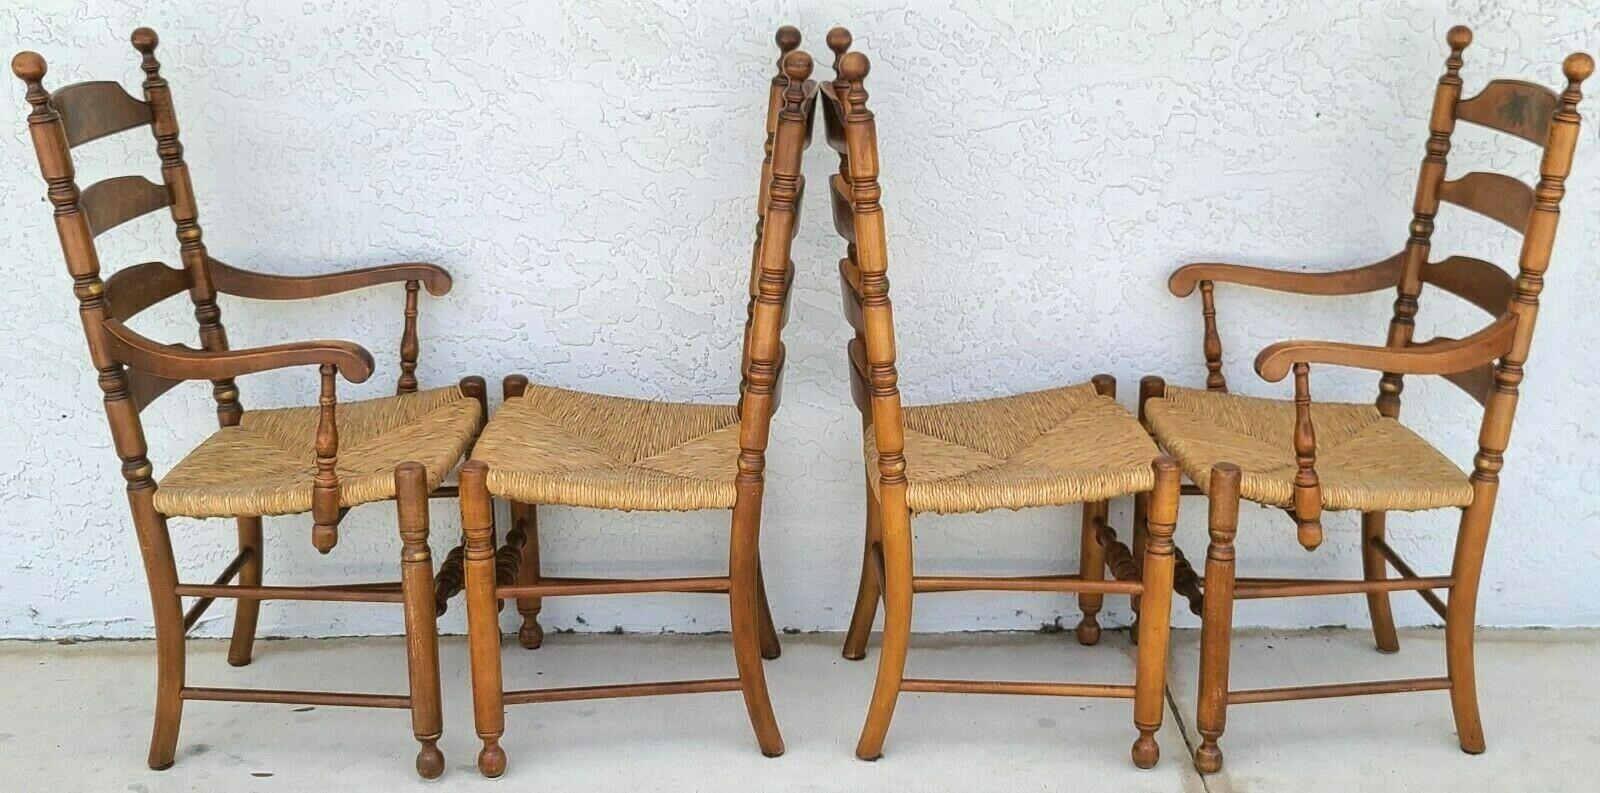 hitchcock ladder back chairs